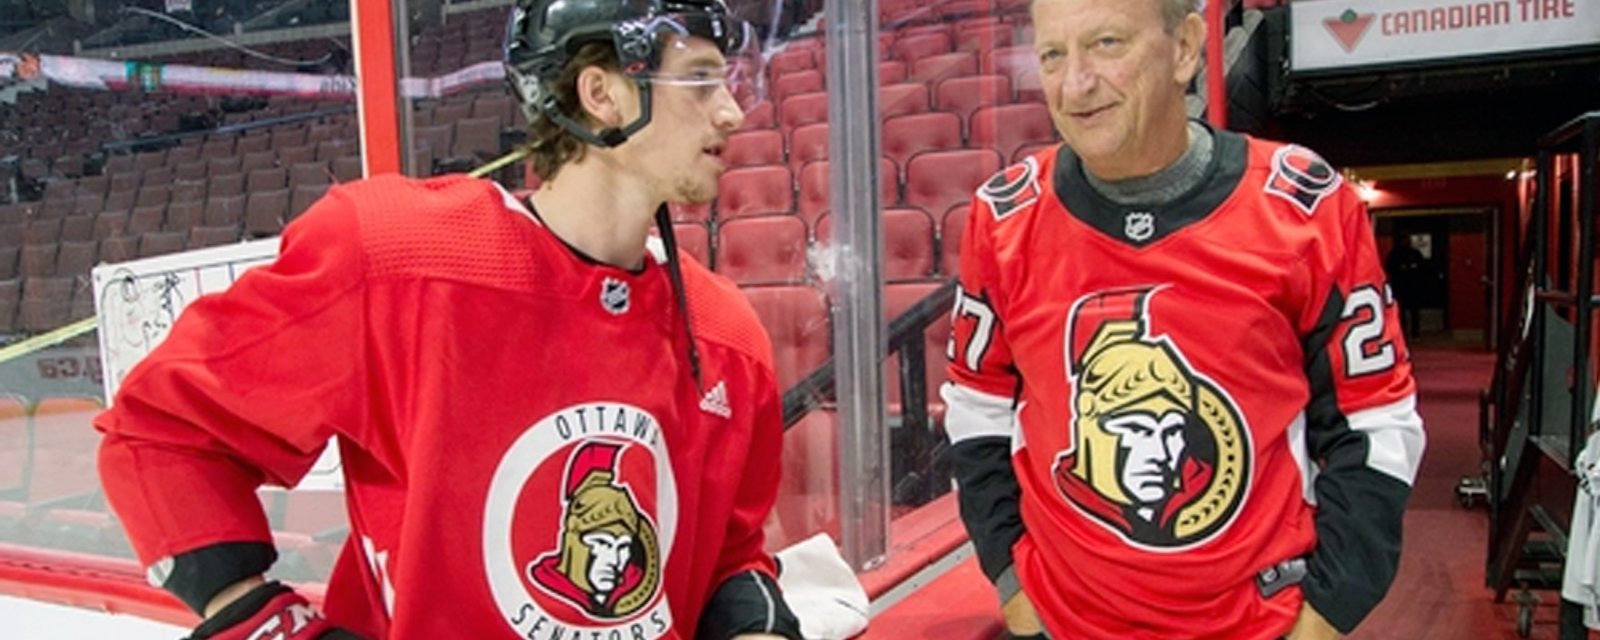 Melnyk: Sens will be “Stanley Cup winner within 4 years”